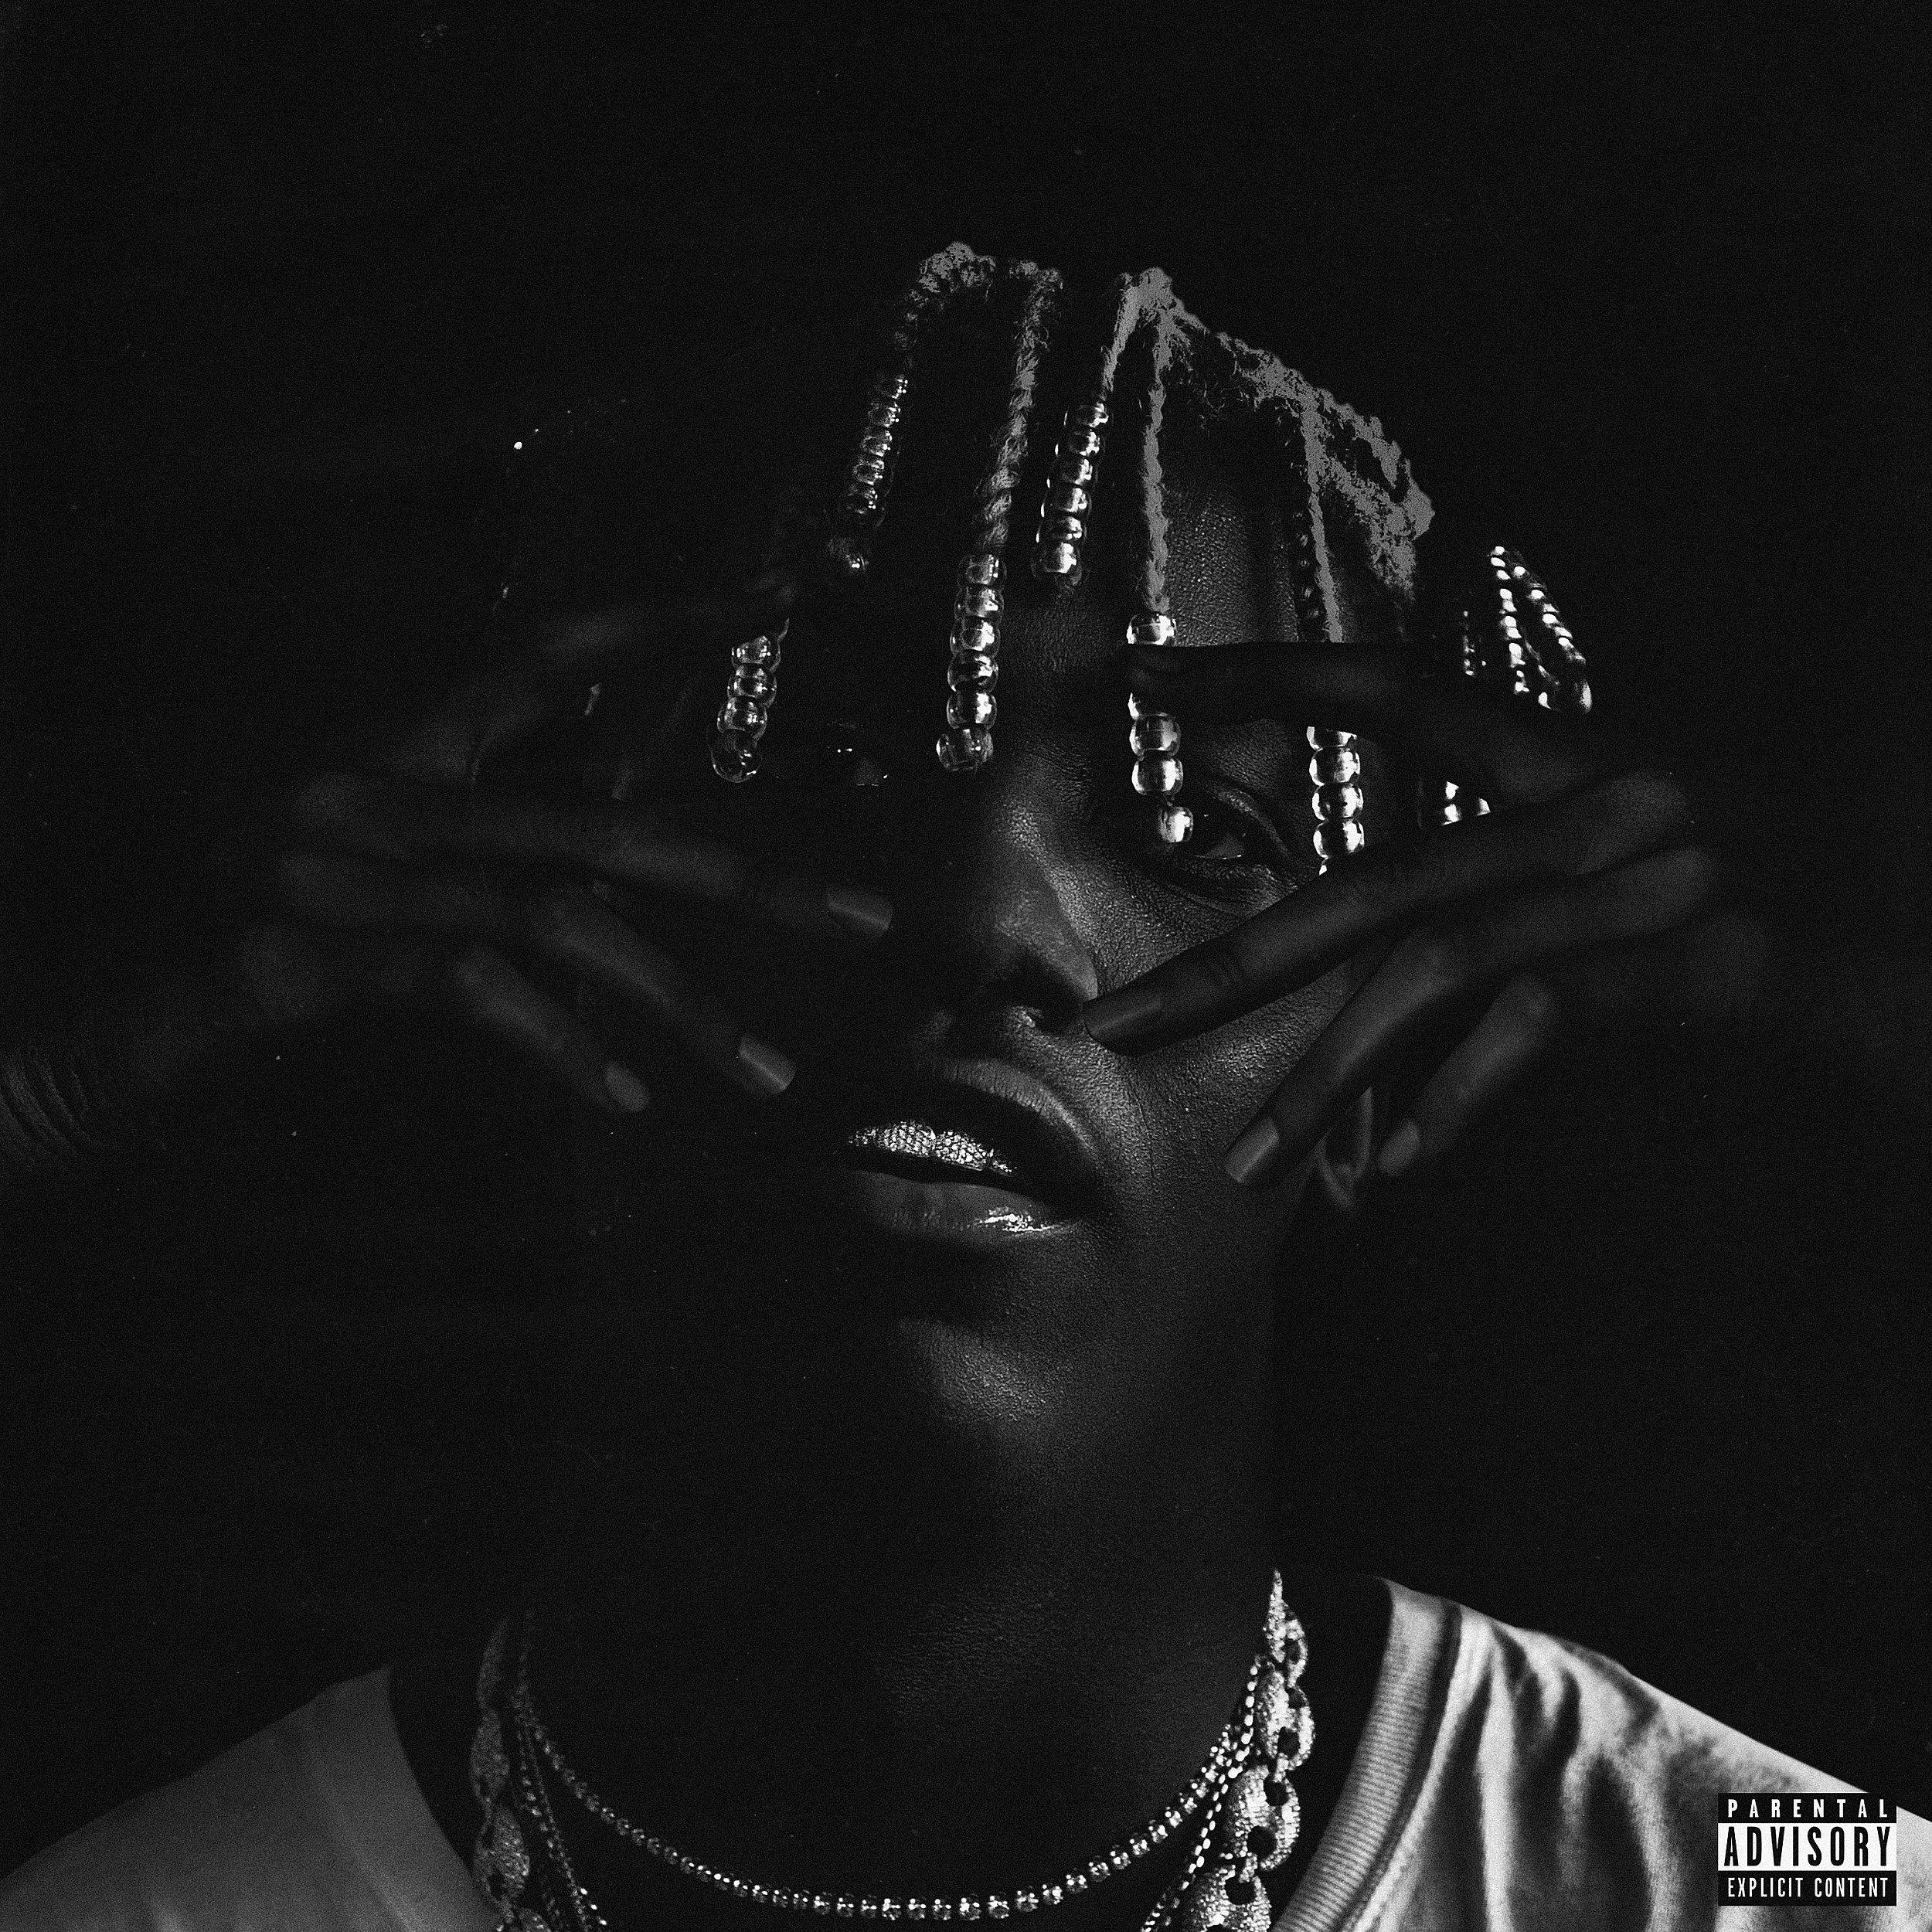 Lil Yachty Drops New Songs Peek A Boo With Migos and